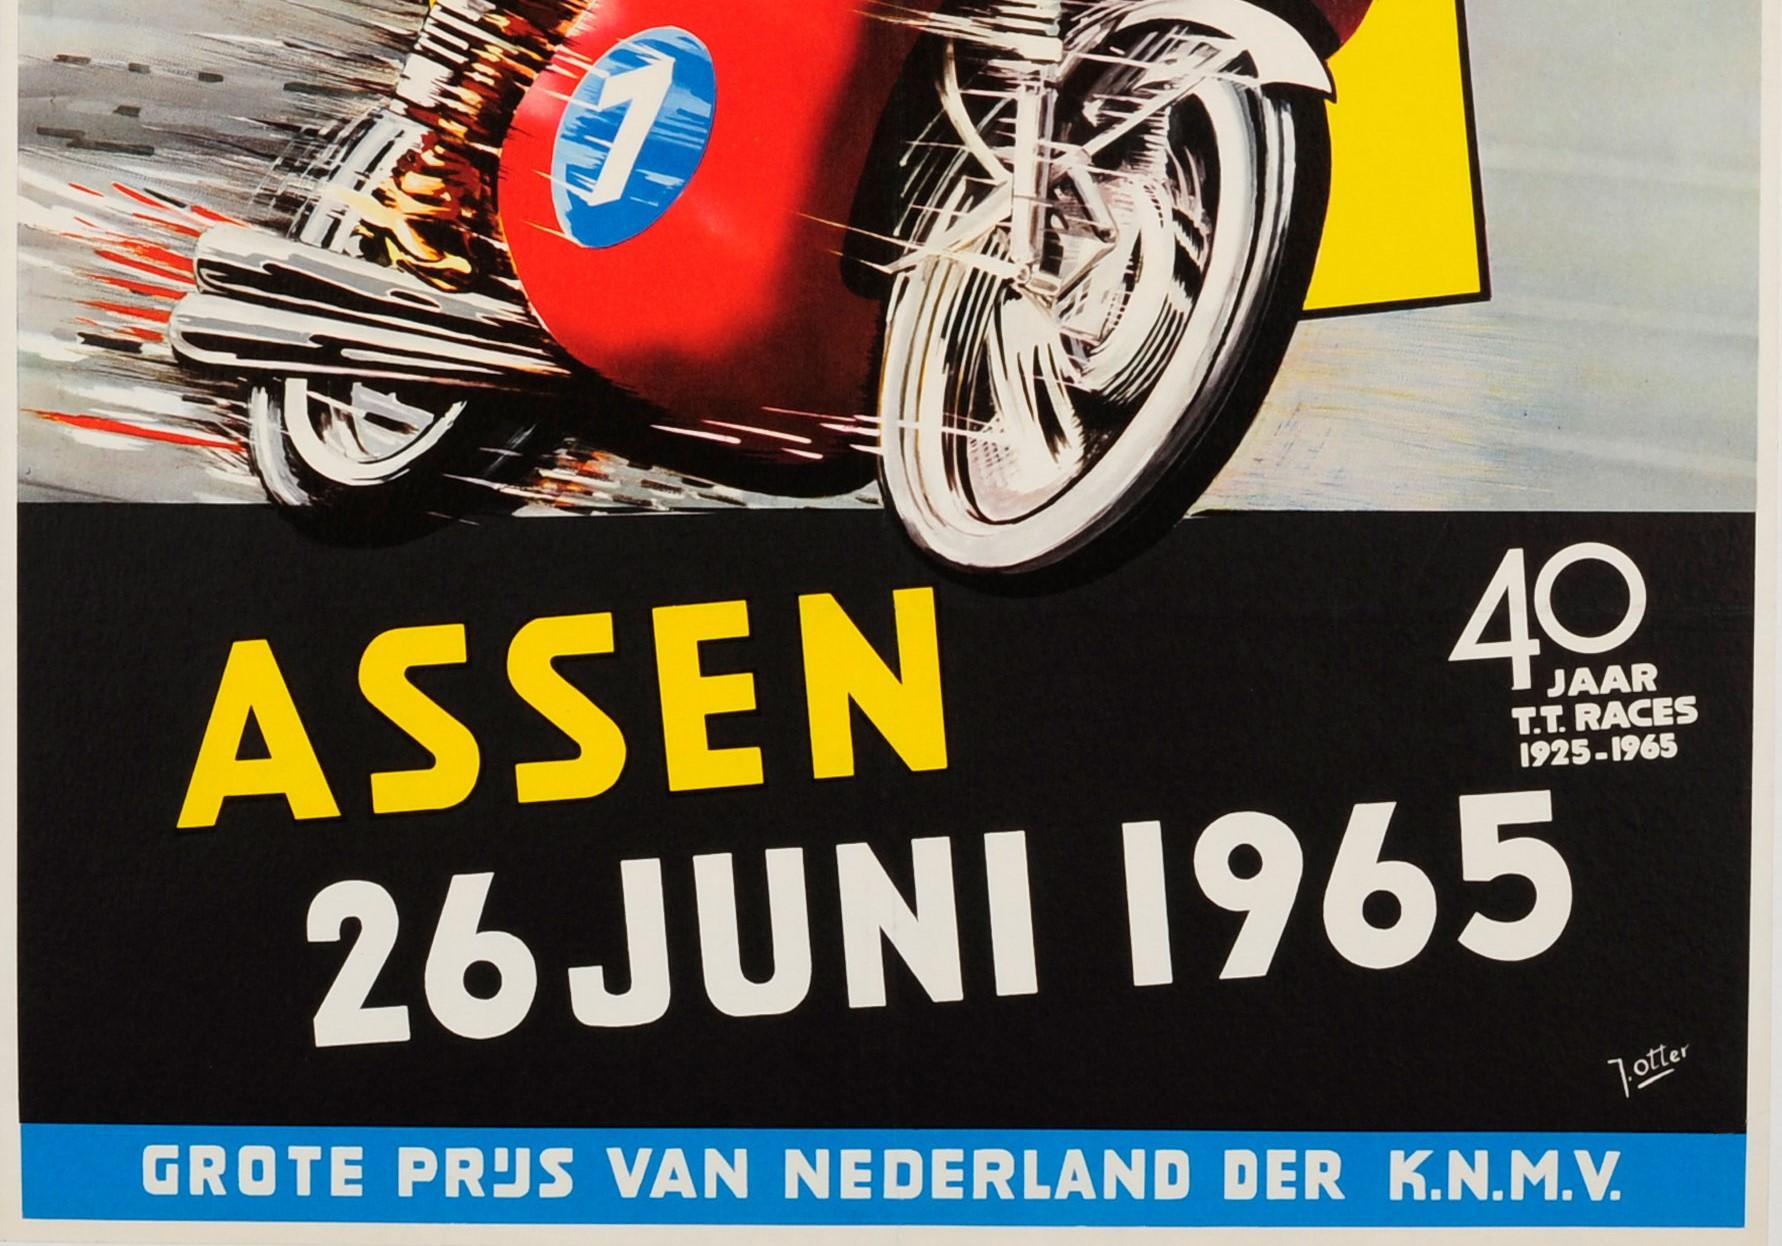 Original vintage sport poster advertising the Dutch TT motor race held in Assen on 26 June 1965. Dynamic artwork featuring a colourful image of a motorbike rider on a motorcycle marked number 7 speeding in front of large TT letters in yellow with a